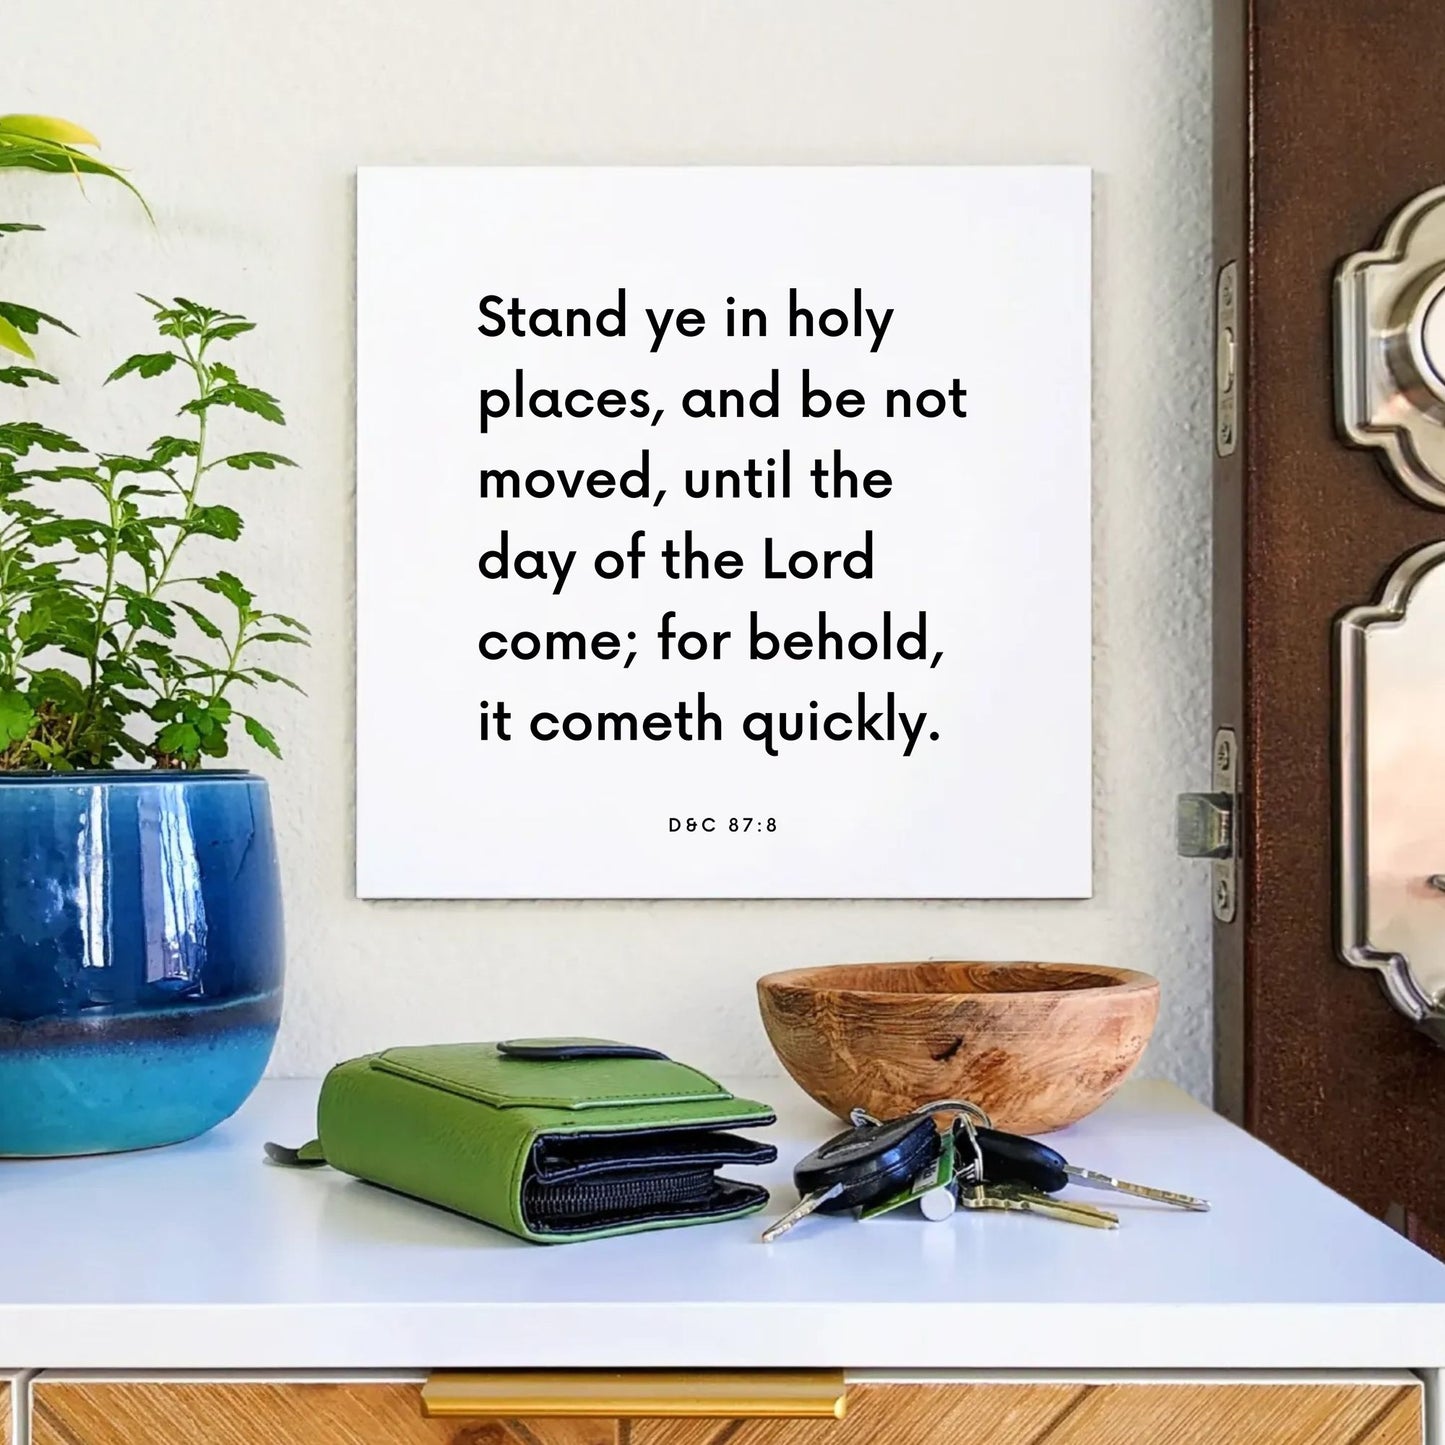 Entryway mouting of the scripture tile for D&C 87:8 - "Stand ye in holy places, and be not moved"